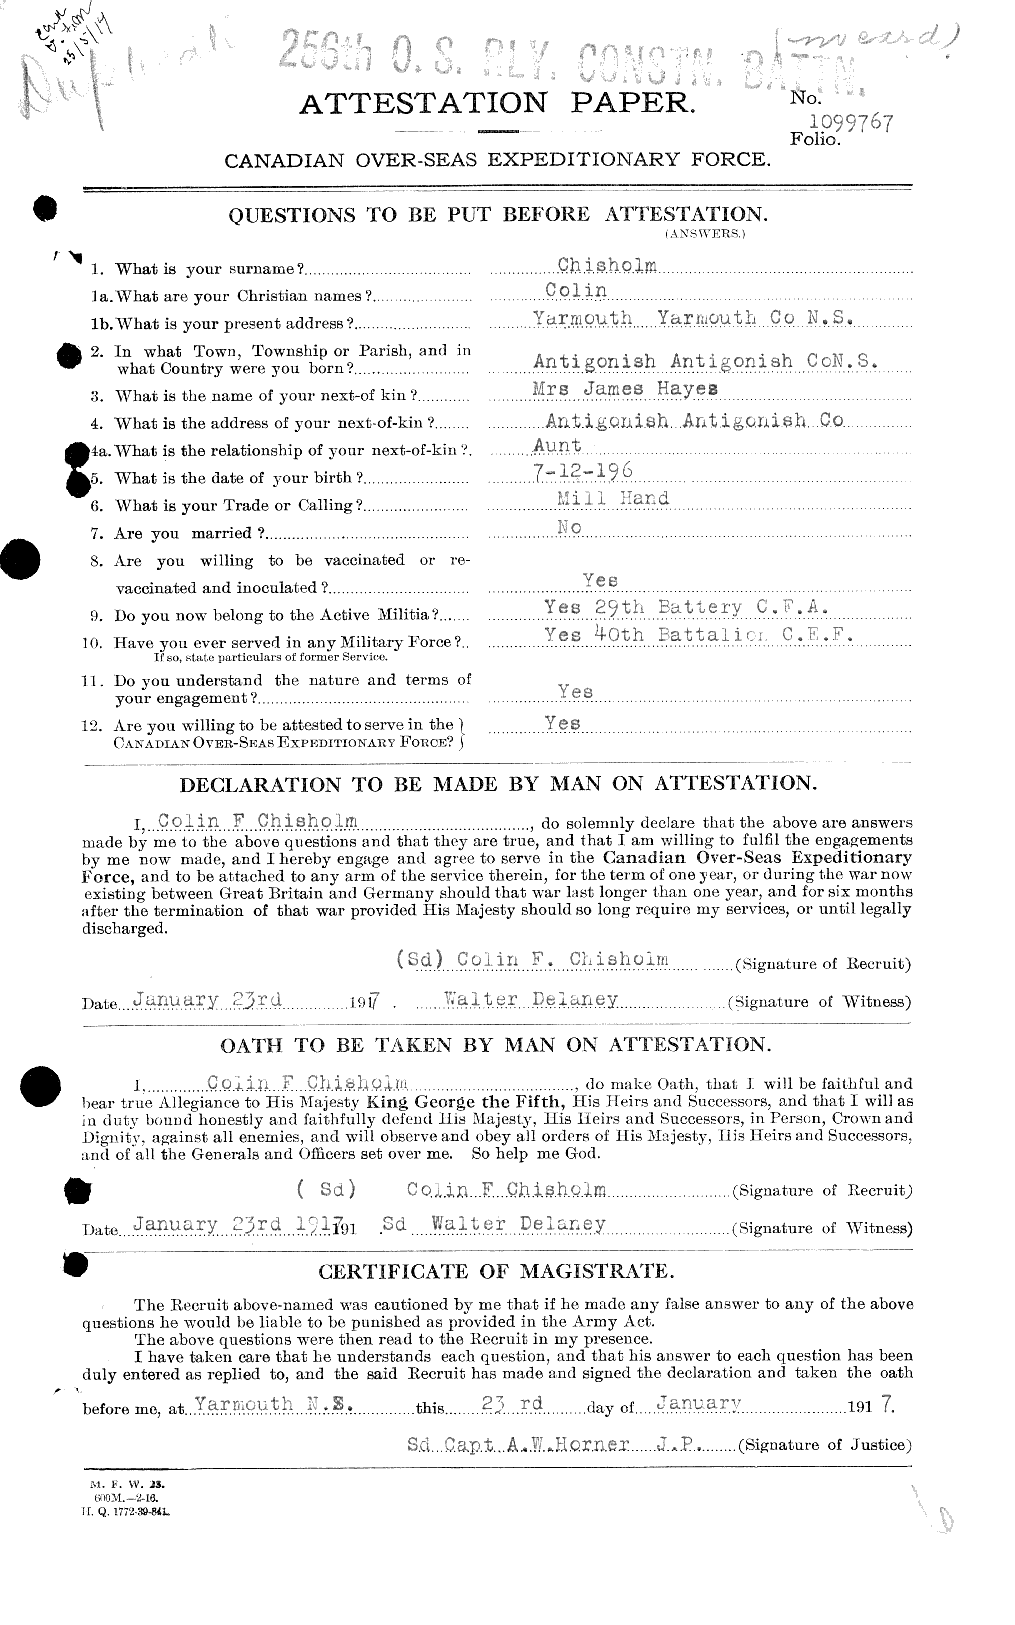 Personnel Records of the First World War - CEF 018237a